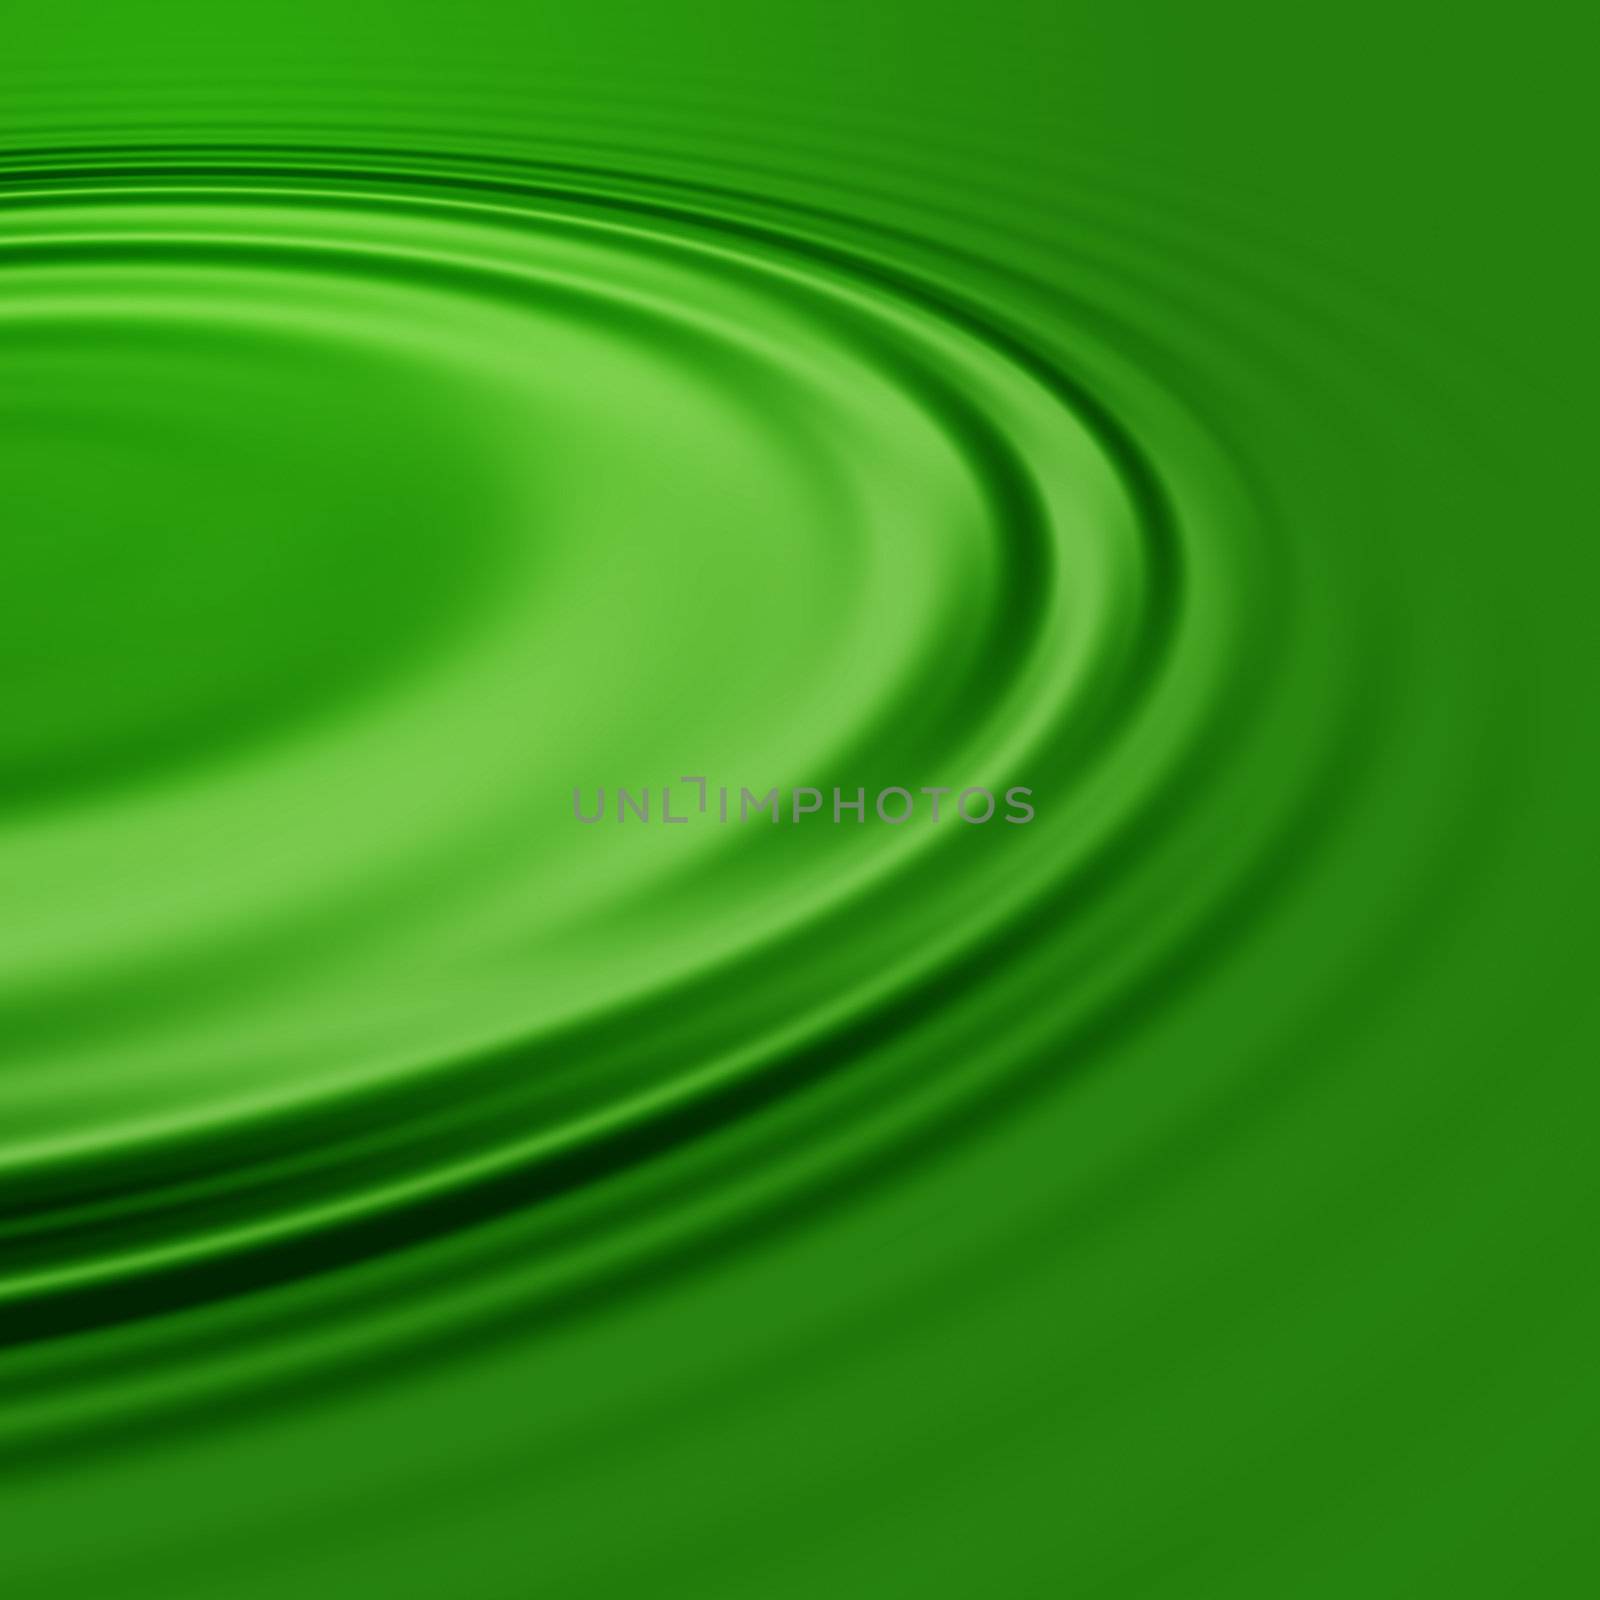 Green Liquid by graficallyminded